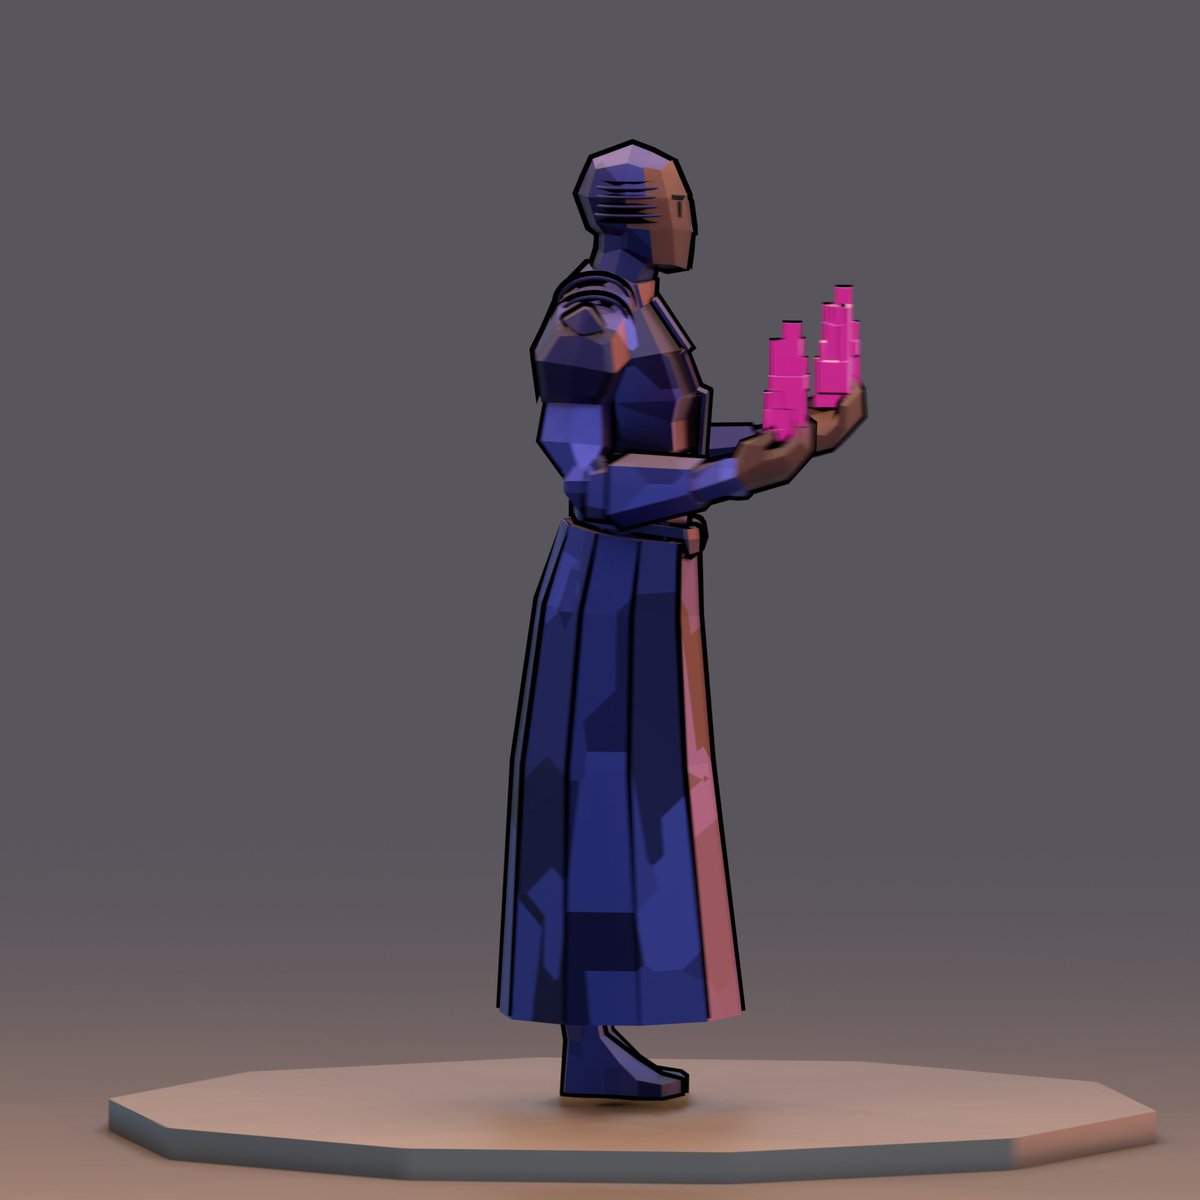 High Evolutionary

A geneticist who sought to create a perfect species out of what he viewed as lower life forms, and build his own utopia.

#Blender3d #B3D #3D #lowpoly #lowpolyart #lowpolycharacter #render3d #digitalsculpt #eevee #characterdesign #guardiansofthegalaxyvol3